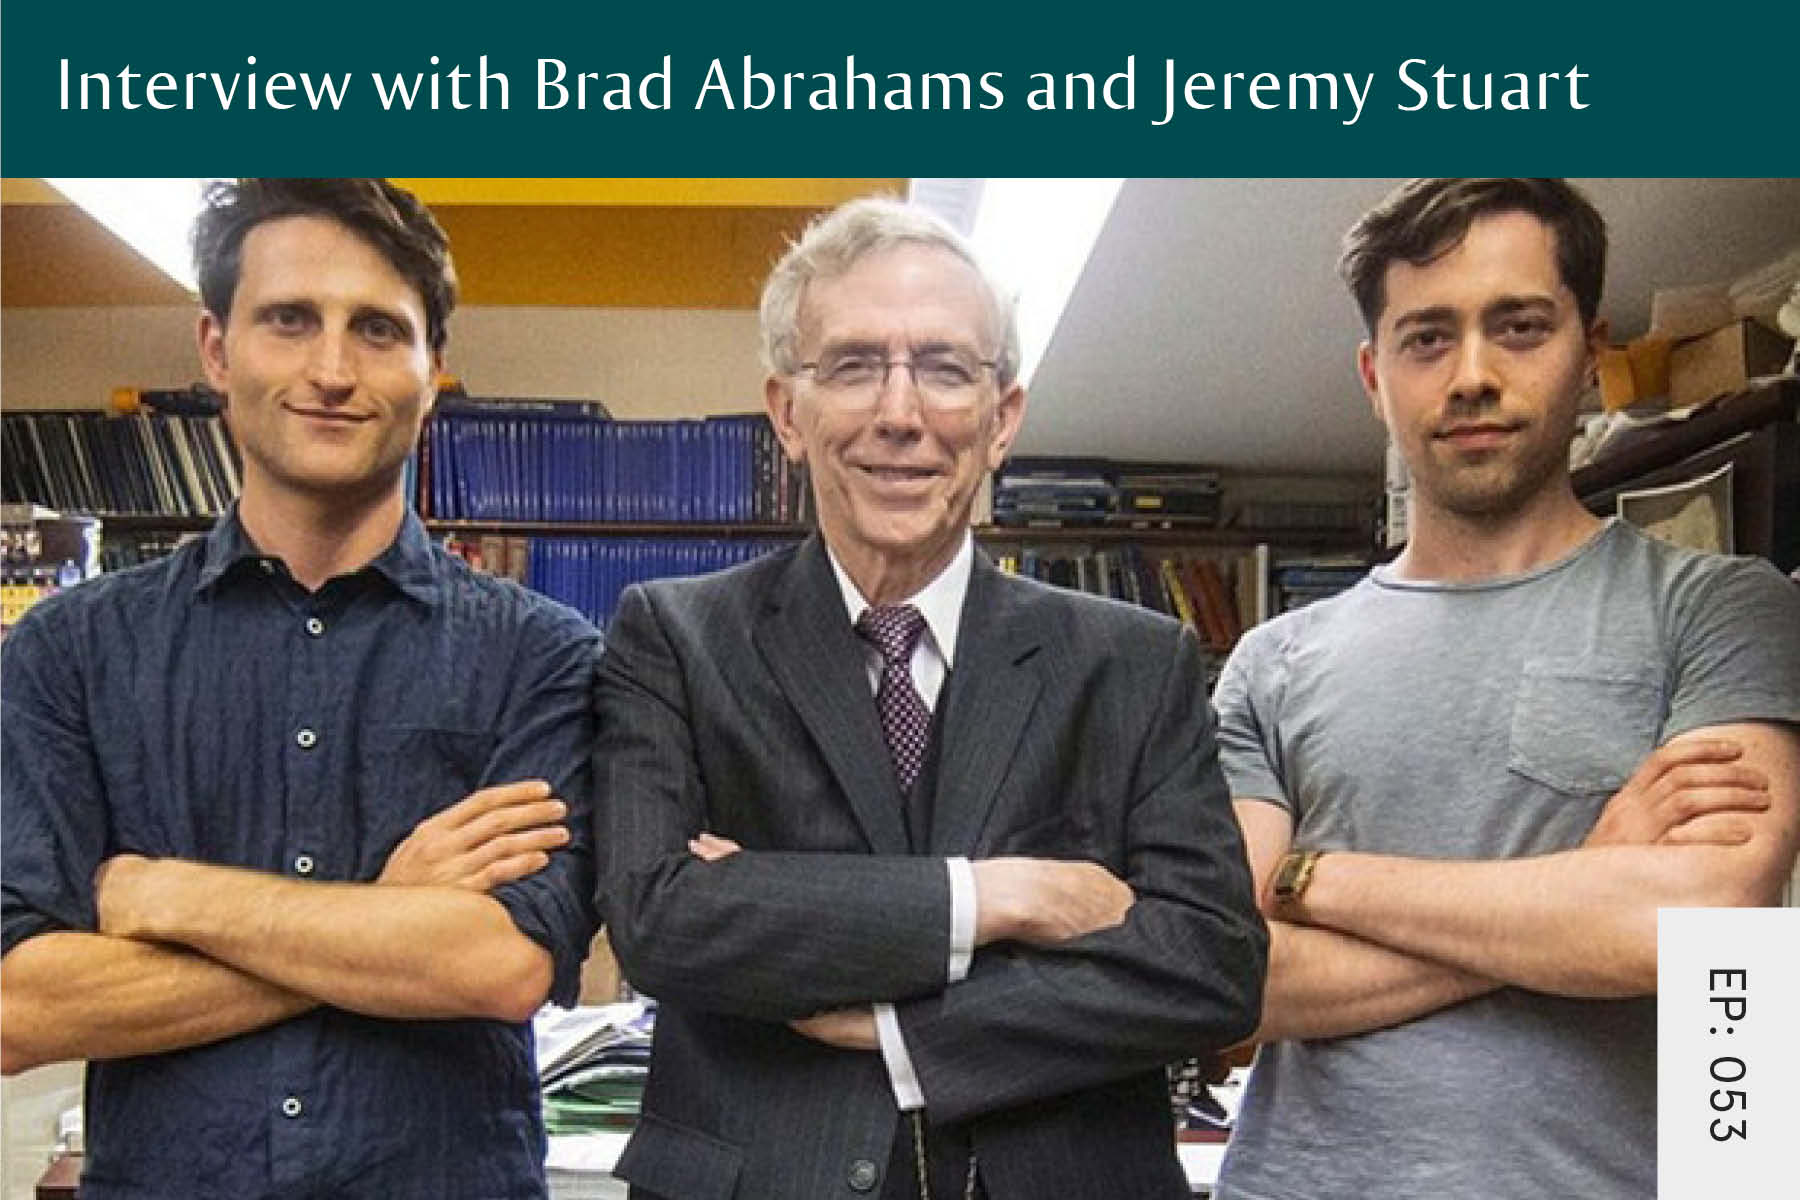 053: Interview with Brad Abrahams and Jeremy Stuart - Seven Health: Eating Disorder Recovery and Anti Diet Nutritionist